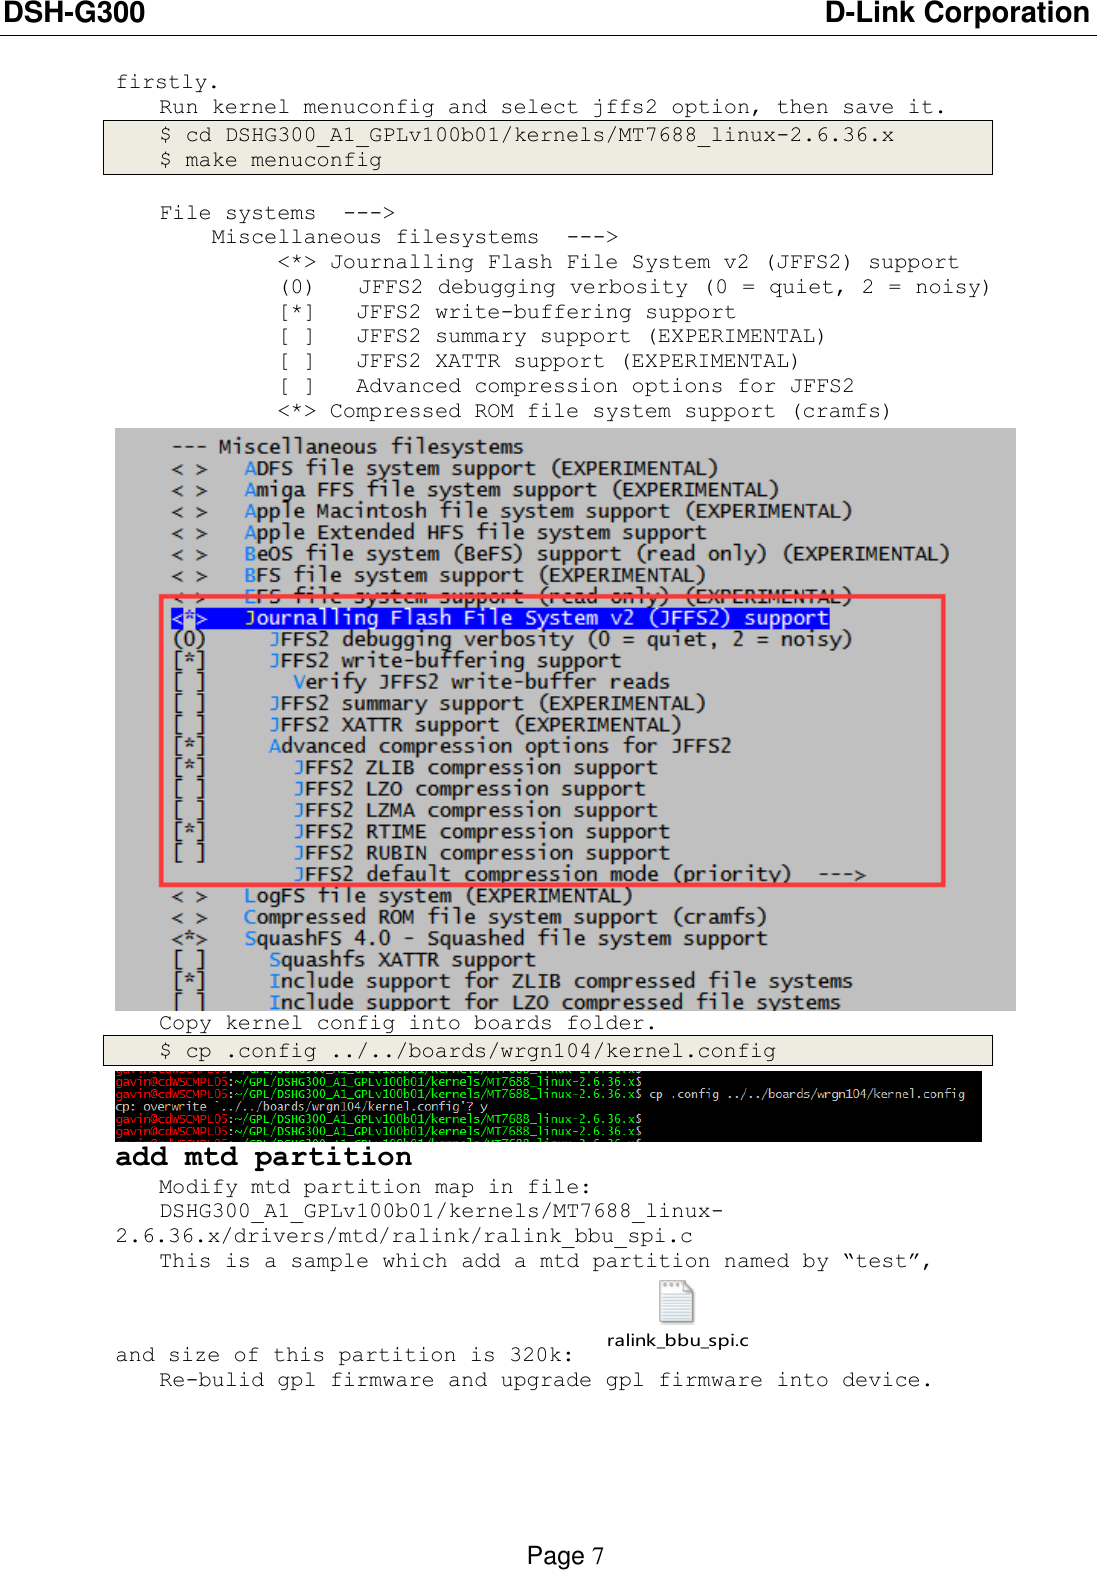 DSH-G300                          D-Link Corporation    Page 7  firstly. Run kernel menuconfig and select jffs2 option, then save it. $ cd DSHG300_A1_GPLv100b01/kernels/MT7688_linux-2.6.36.x $ make menuconfig  File systems  ---&gt;     Miscellaneous filesystems  ---&gt;          &lt;*&gt; Journalling Flash File System v2 (JFFS2) support          (0)   JFFS2 debugging verbosity (0 = quiet, 2 = noisy)          [*]   JFFS2 write-buffering support          [ ]   JFFS2 summary support (EXPERIMENTAL)           [ ]   JFFS2 XATTR support (EXPERIMENTAL)           [ ]   Advanced compression options for JFFS2          &lt;*&gt; Compressed ROM file system support (cramfs)  Copy kernel config into boards folder. $ cp .config ../../boards/wrgn104/kernel.config  add mtd partition Modify mtd partition map in file: DSHG300_A1_GPLv100b01/kernels/MT7688_linux-2.6.36.x/drivers/mtd/ralink/ralink_bbu_spi.c This is a sample which add a mtd partition named by “test”, and size of this partition is 320k: ralink_bbu_spi.c  Re-bulid gpl firmware and upgrade gpl firmware into device. 